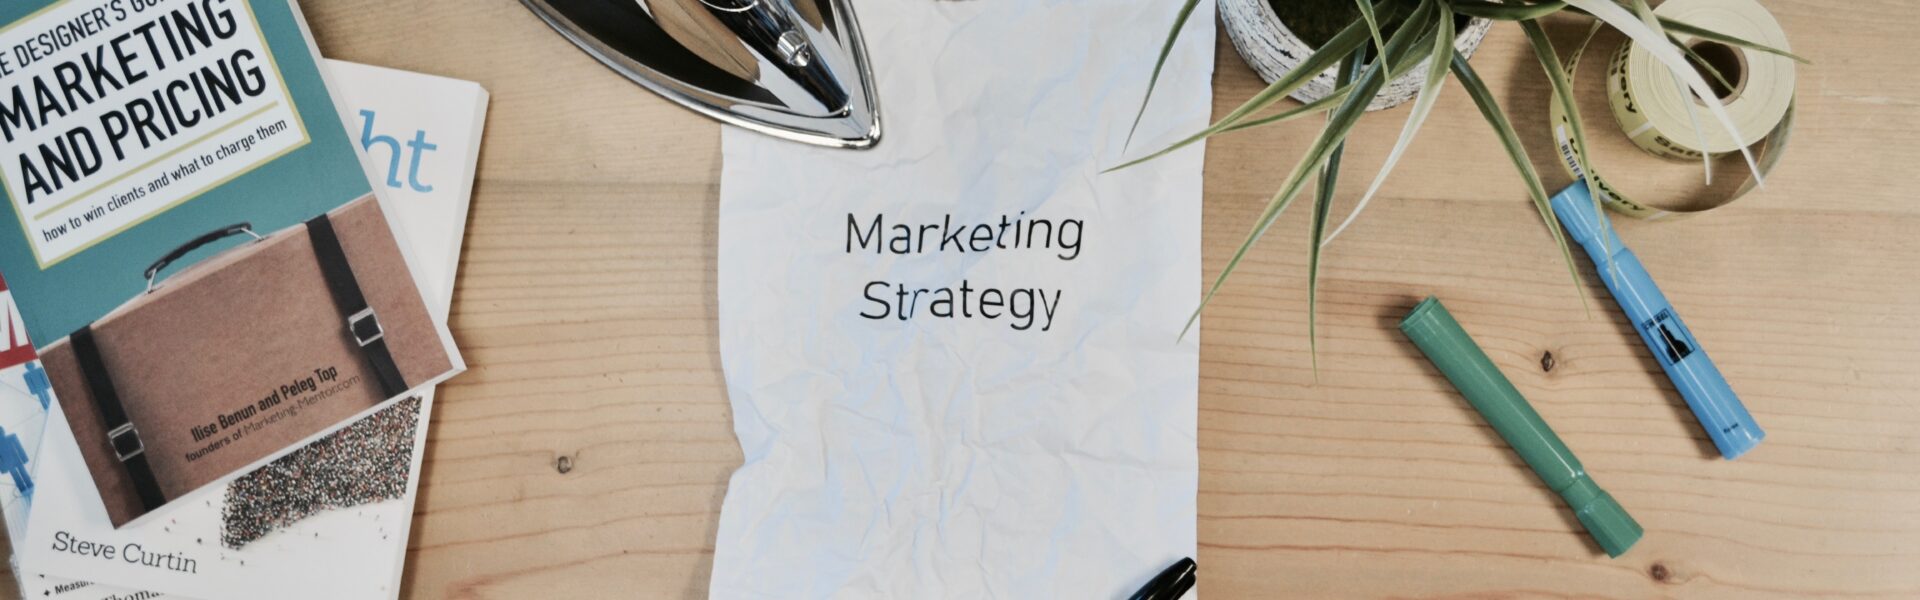 Desk showing work on developing a marketing strategy